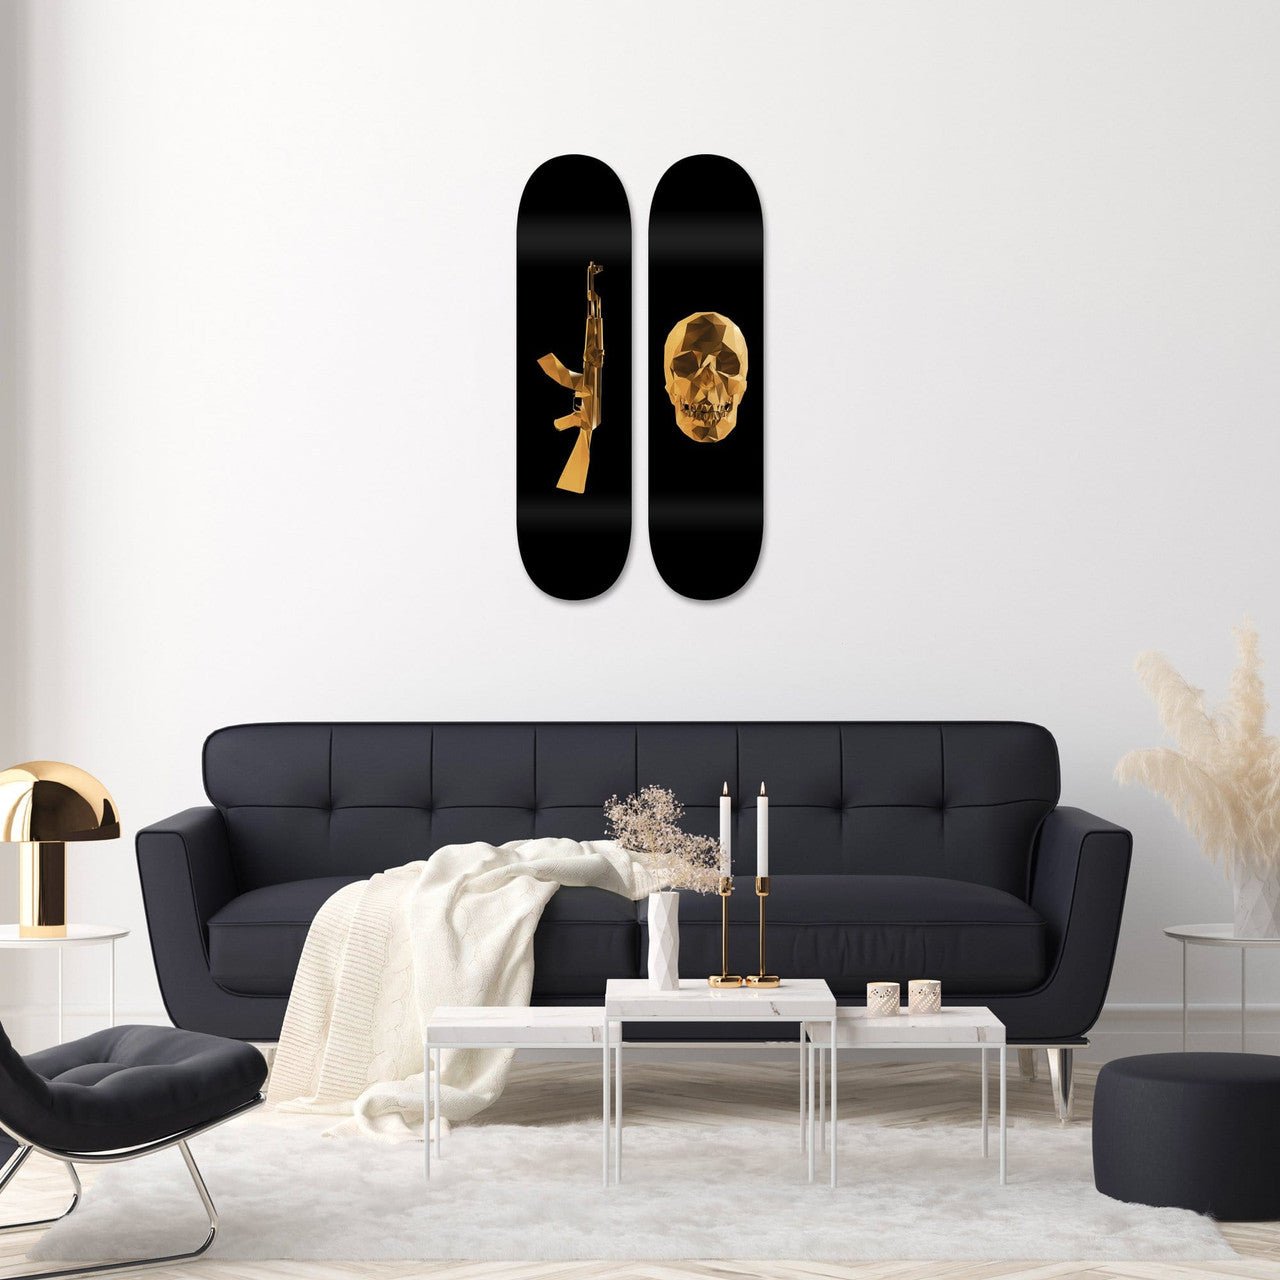 Bundle: "Gold AK-47 & Skull" - Skateboard - The Art Lab Acrylic Glass Art - Skateboards, Surfboards & Glass Prints Wall Decor for your Home.